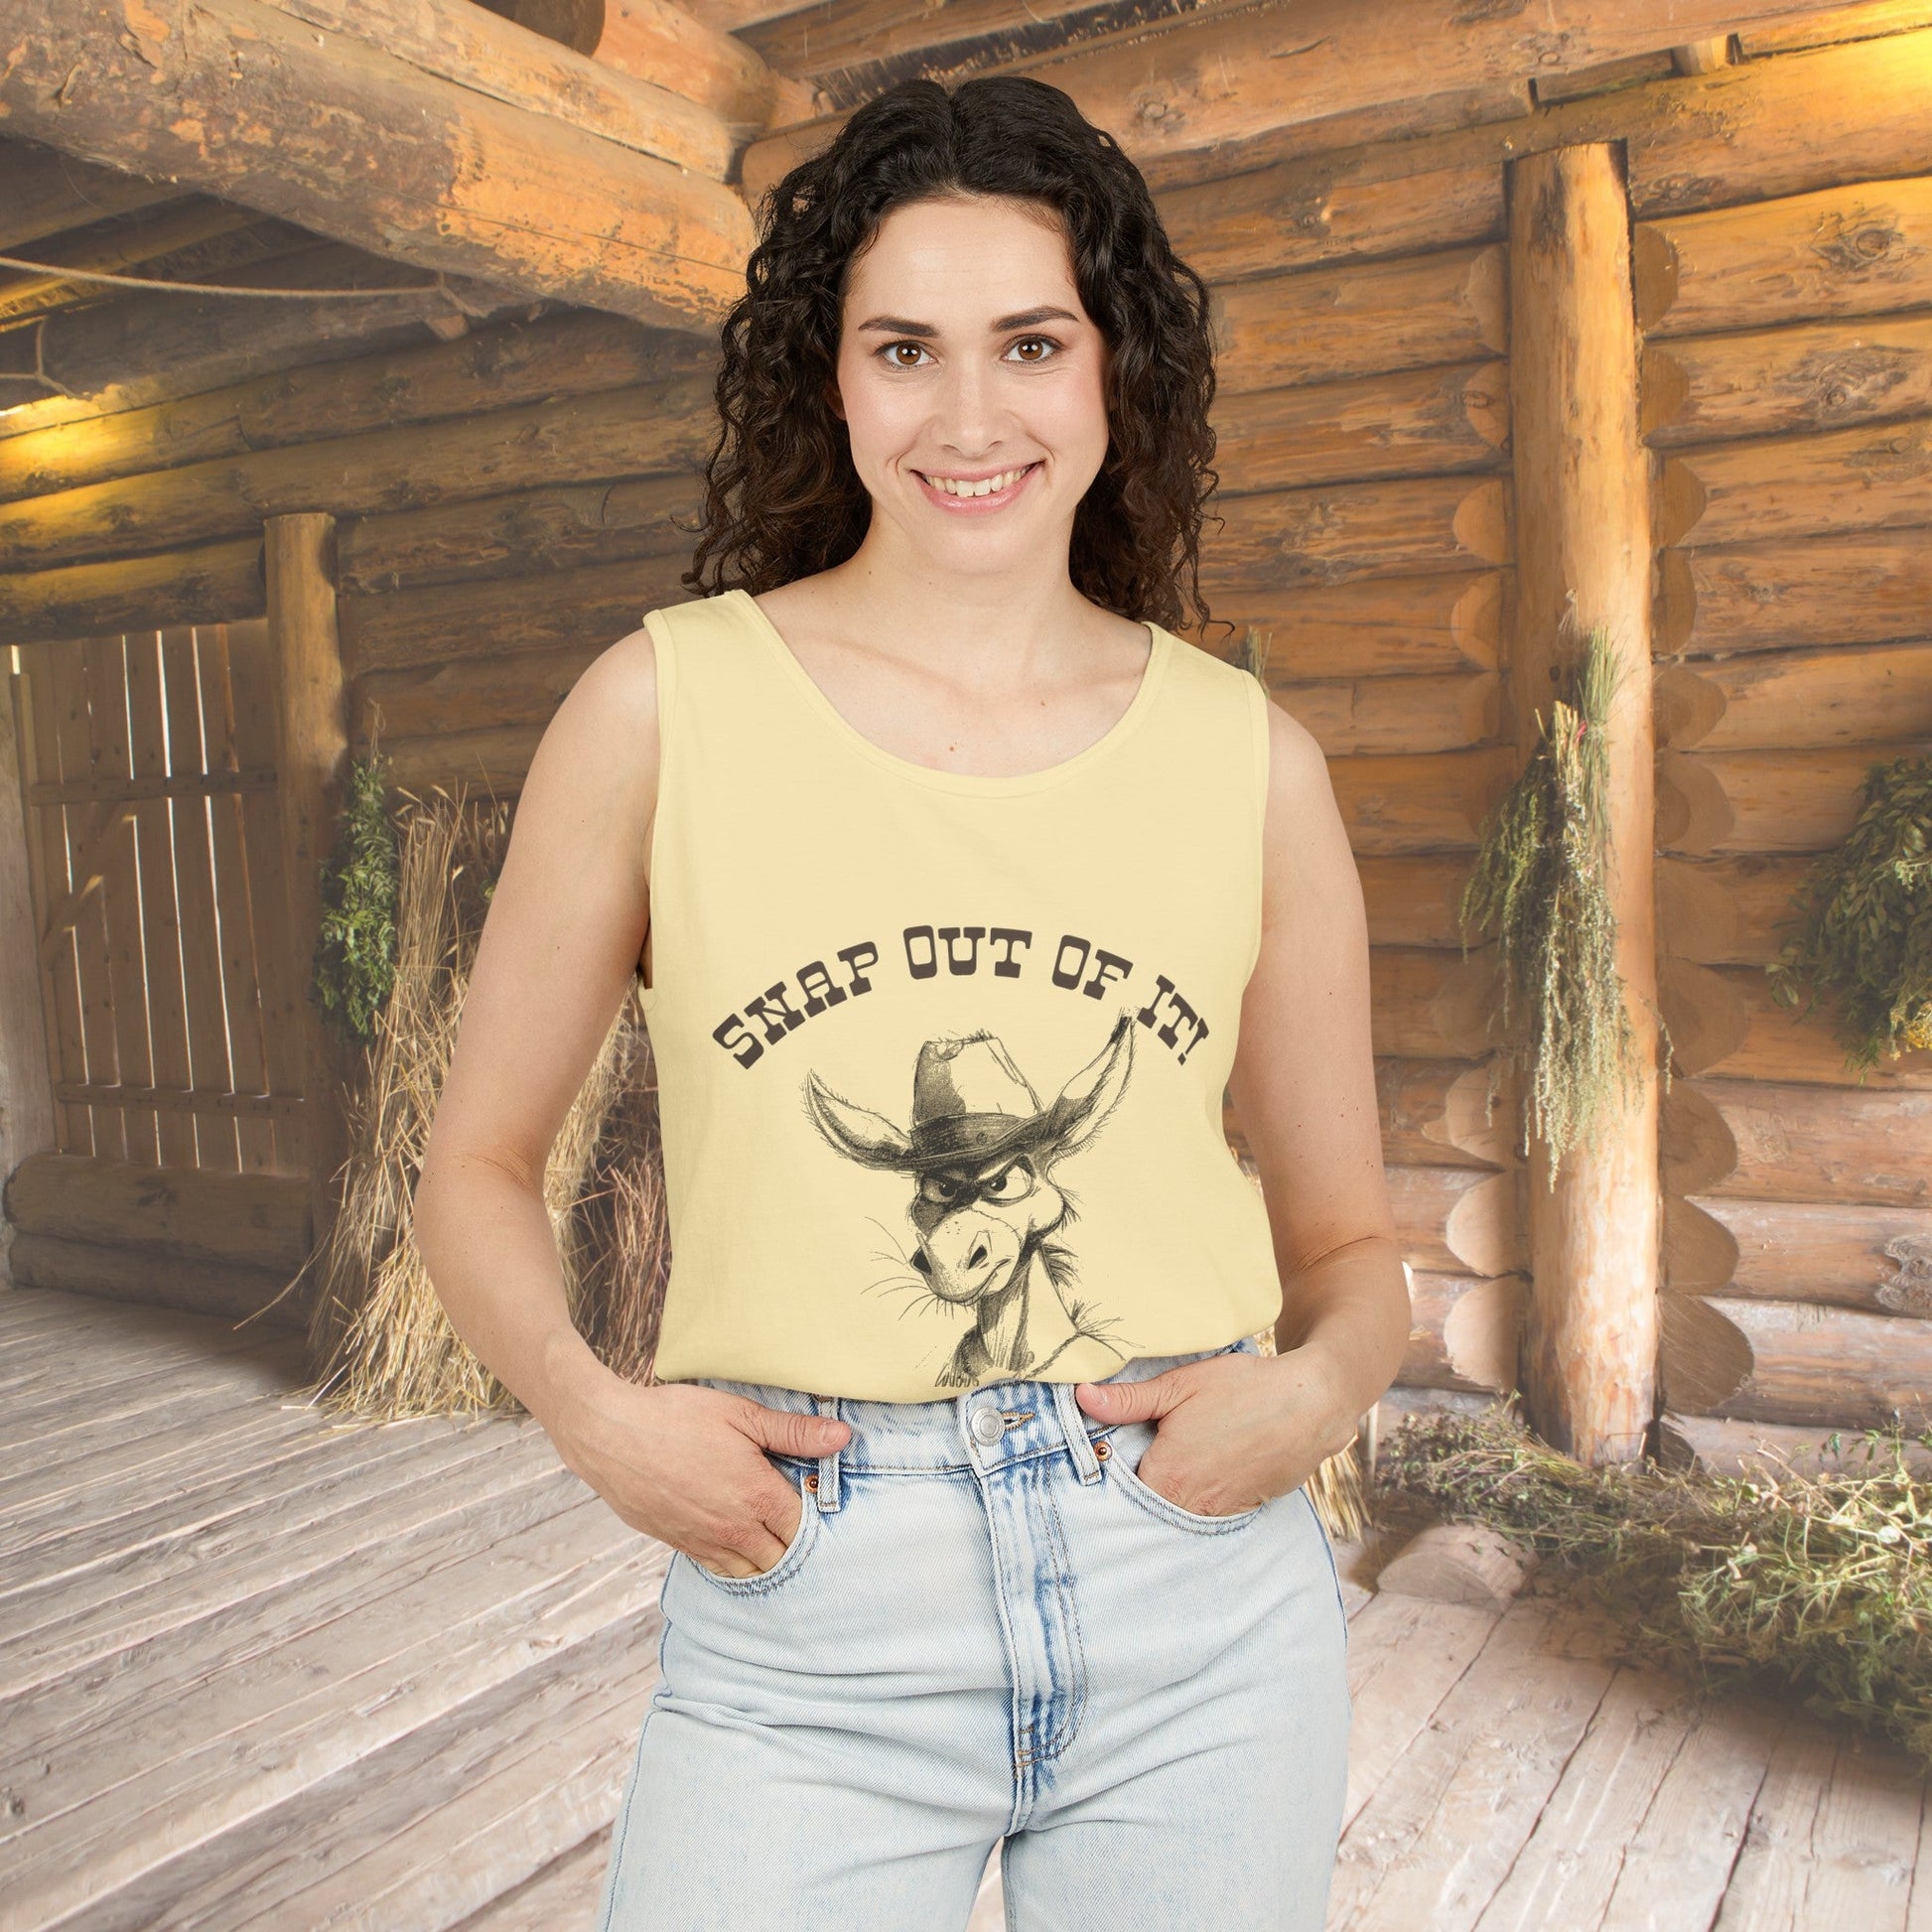 Funny Donkey Comfort Color Tank Top Perfect for Horse Lovers! Snap Out of It! - FlooredByArt